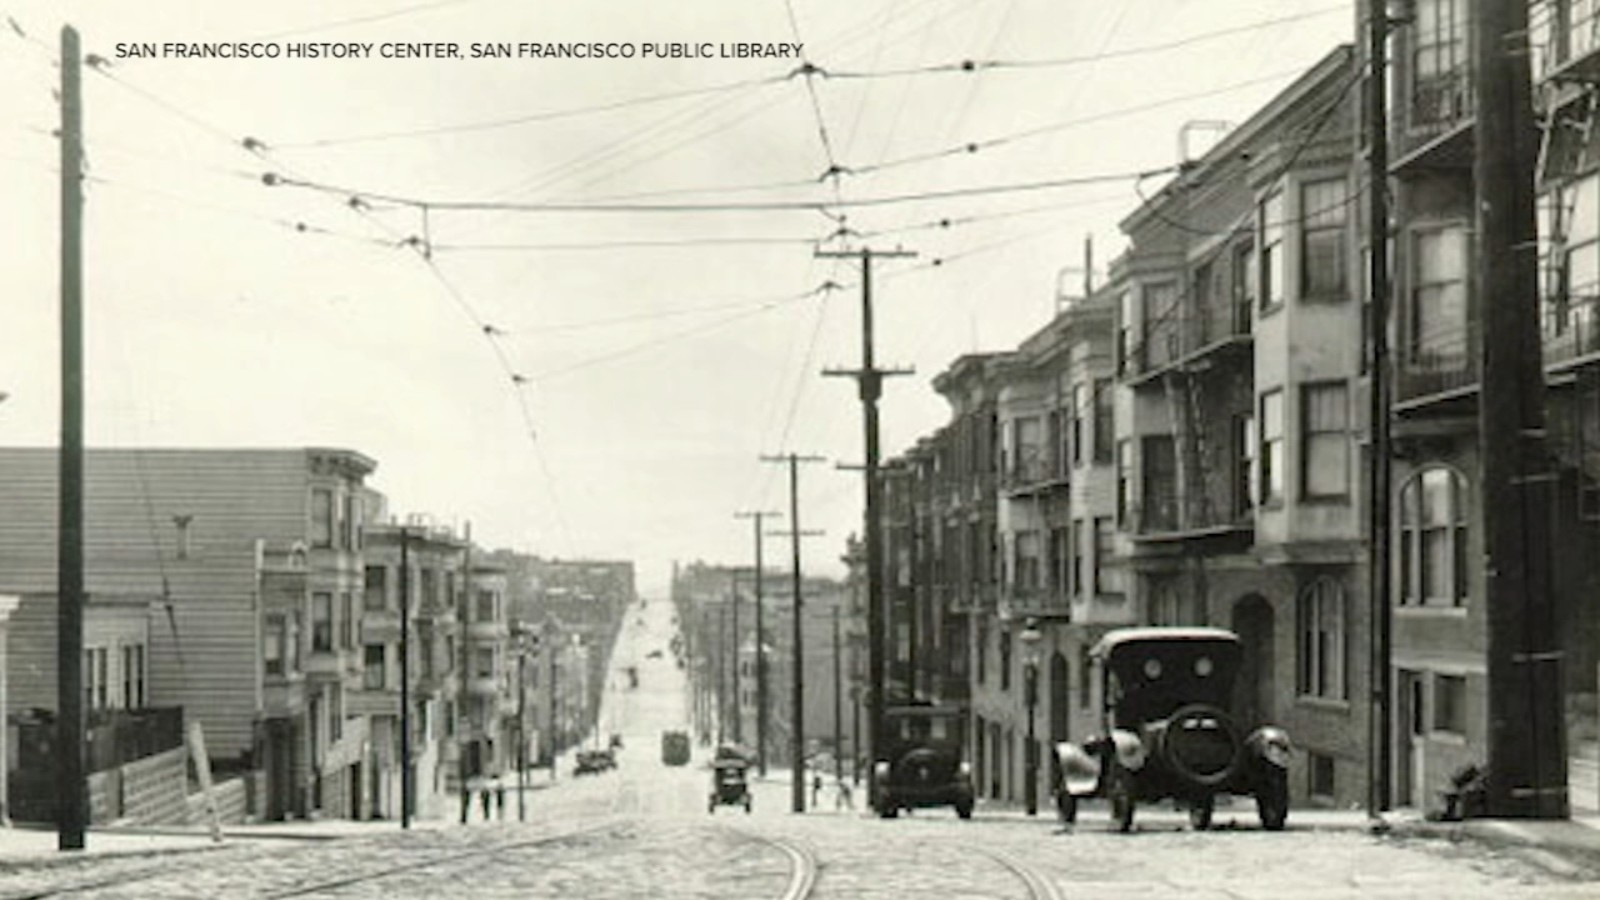 SF nearly had its own power grid 100 years ago until PG&E came along. Here's what happened